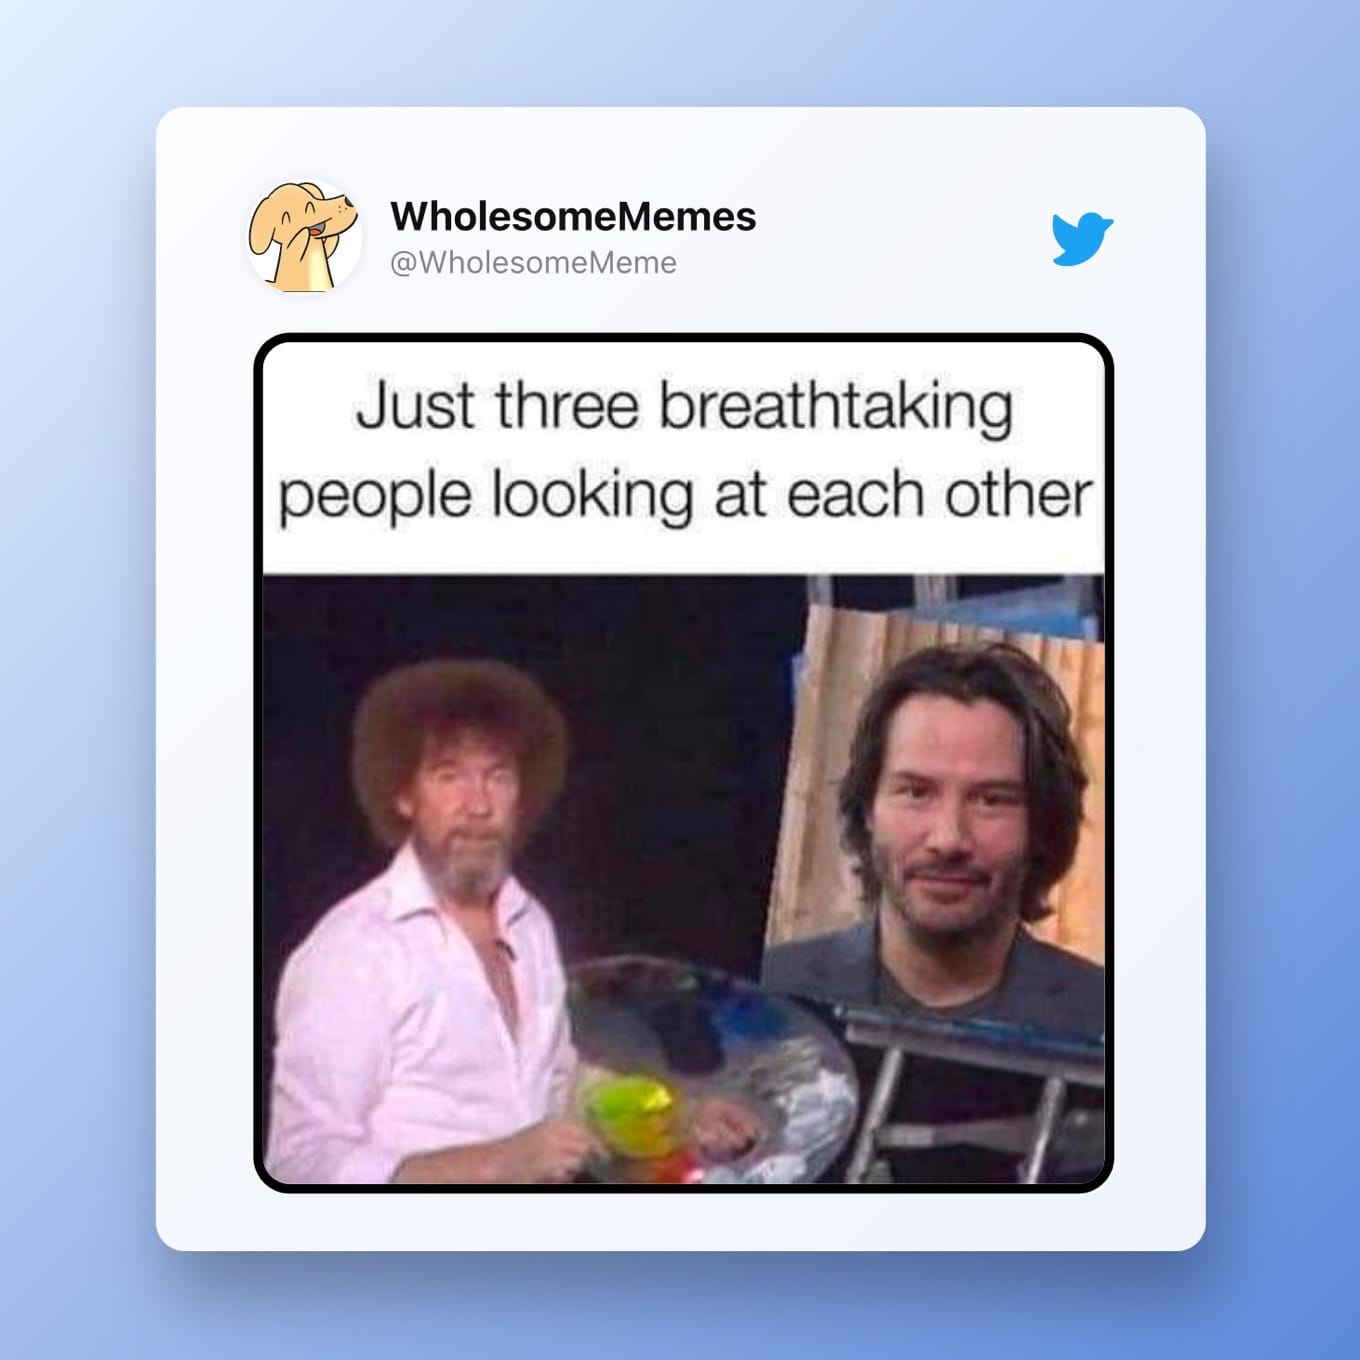 Wholesome Meme: Just three breathtaking people looking at each other [Image shows Bob Ross and Keanu Reeves]